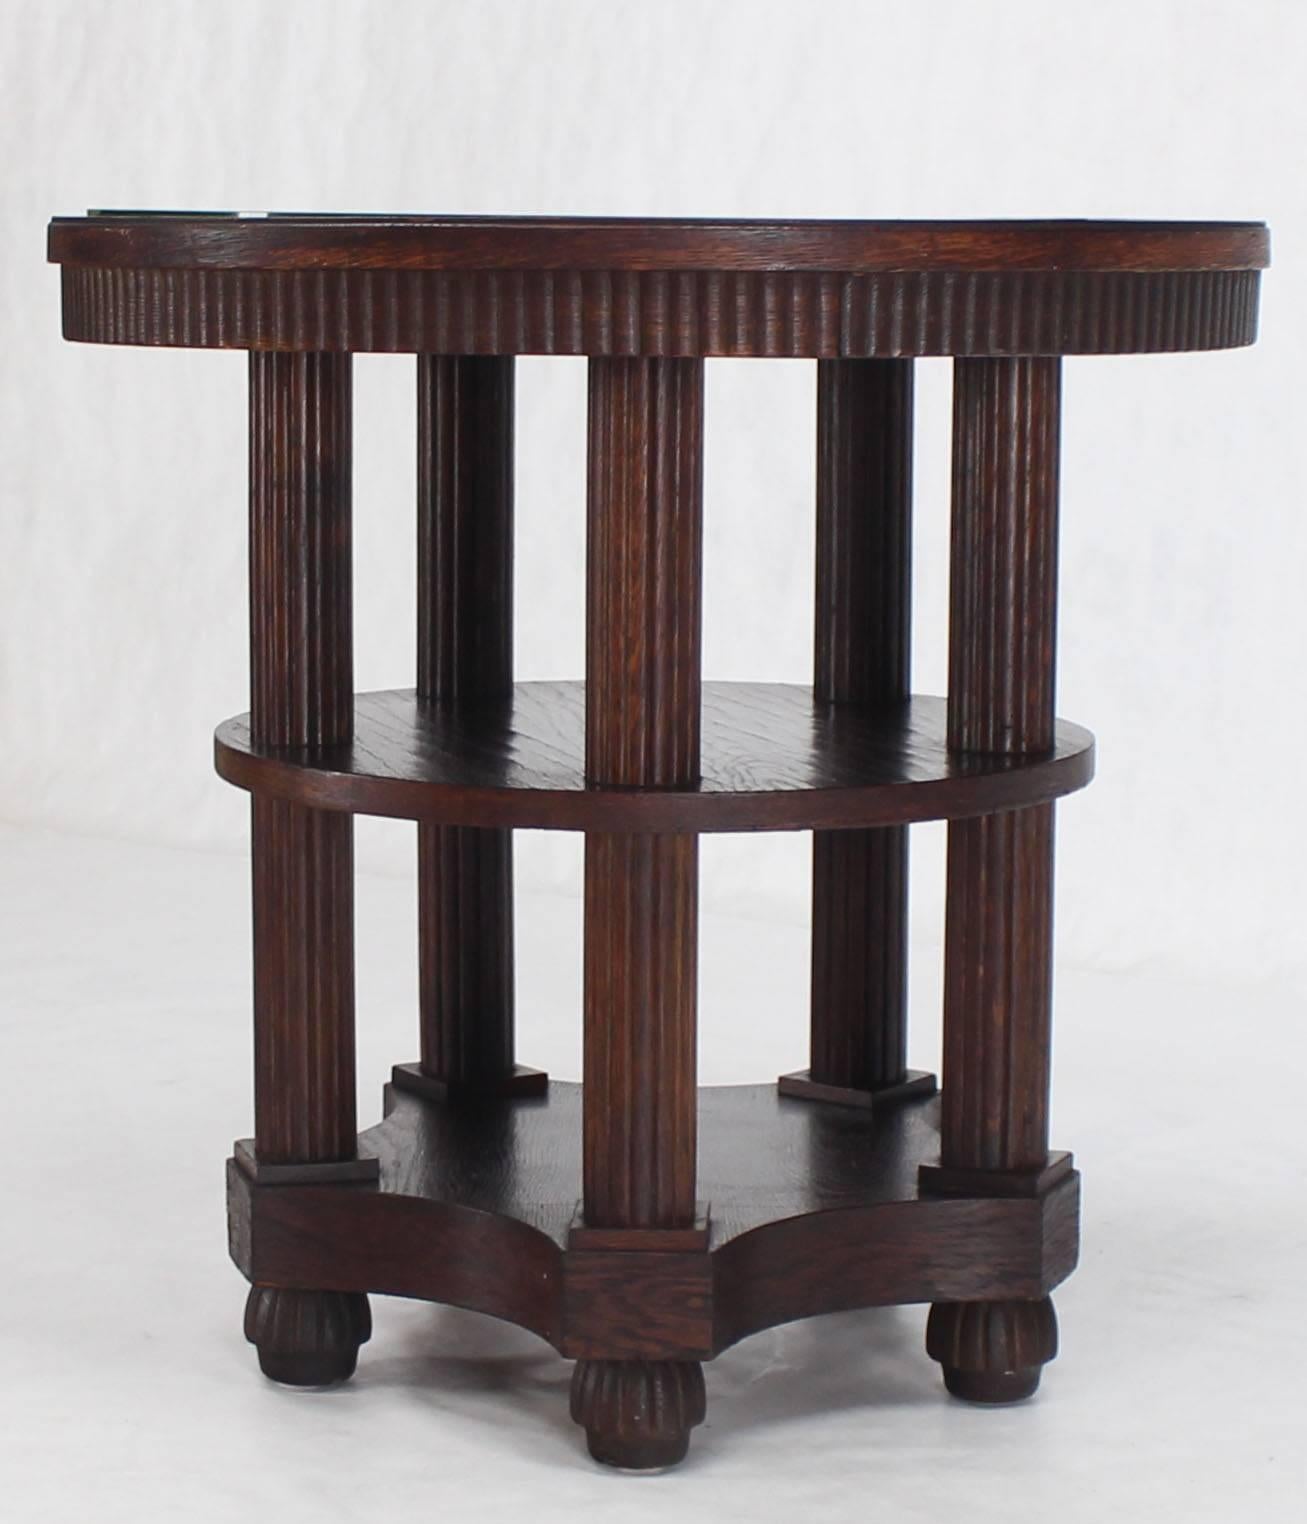 20th Century Fluted Legs Round Center Pedestal Gueridon Table Art Deco Arts and Crafts Oak  For Sale